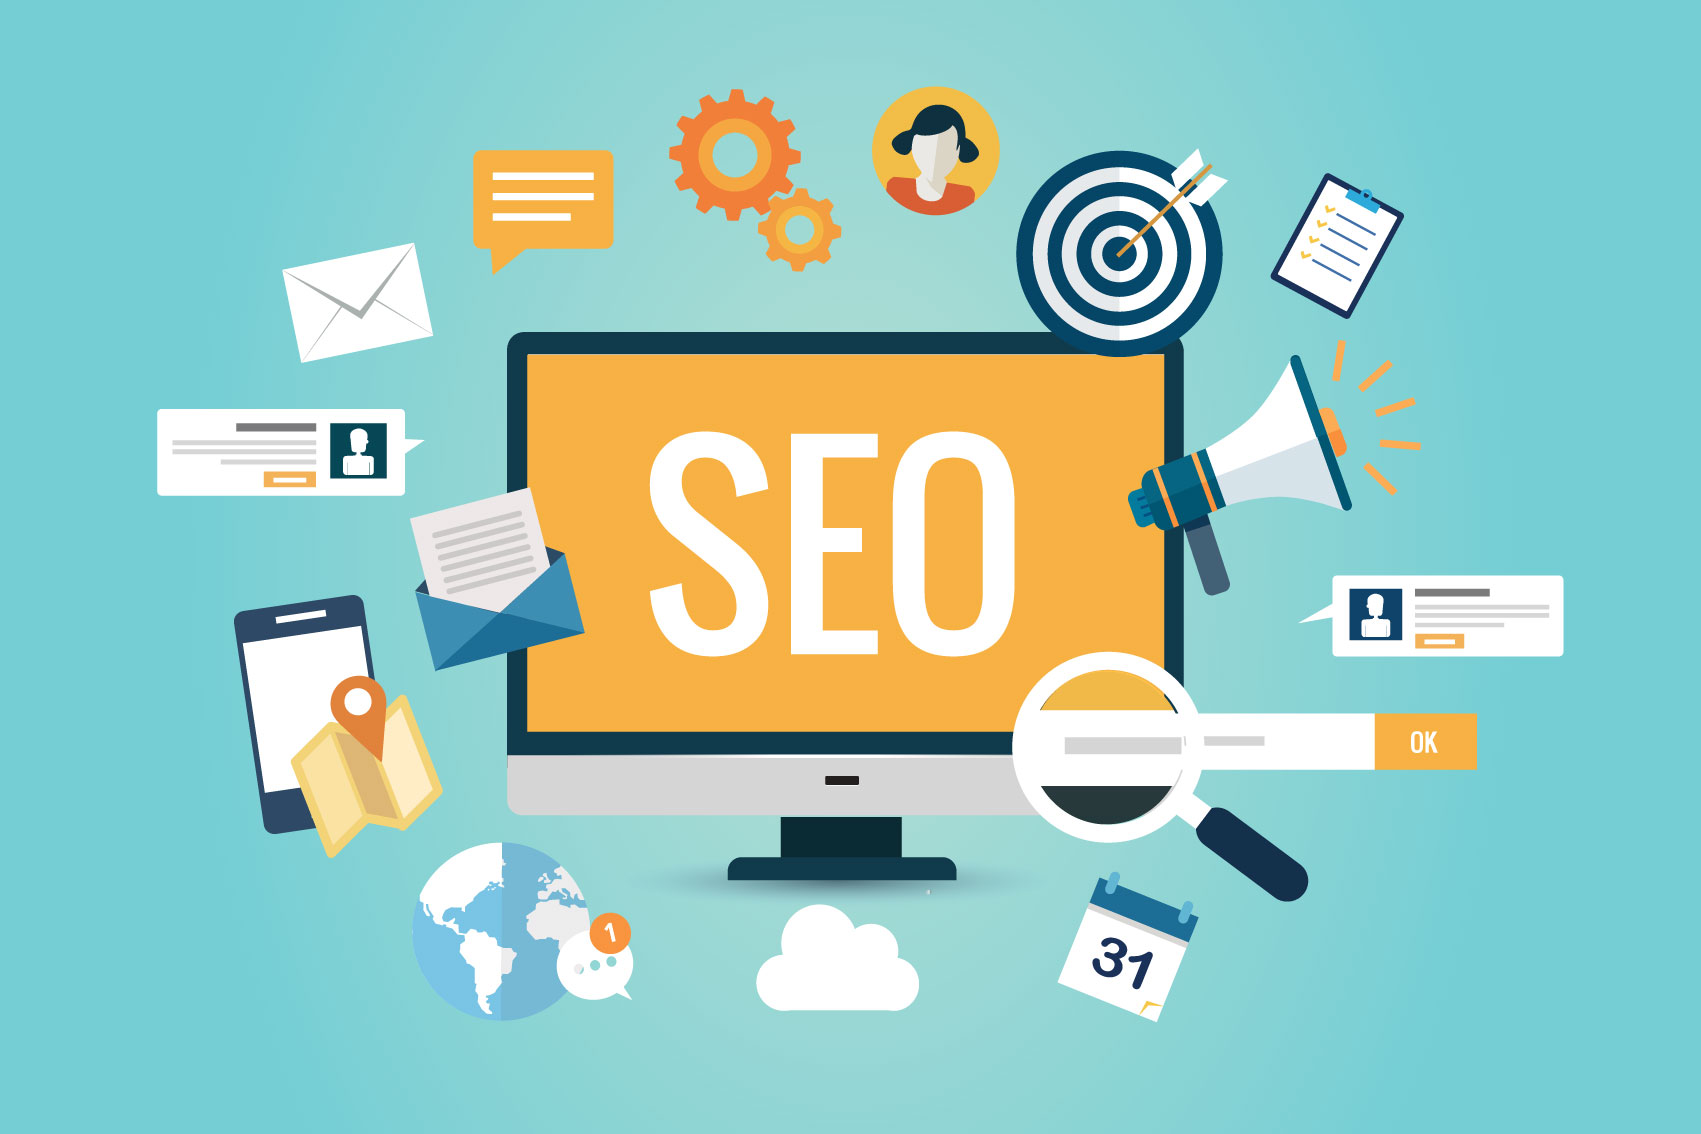 How to choose the best seo services for your company?